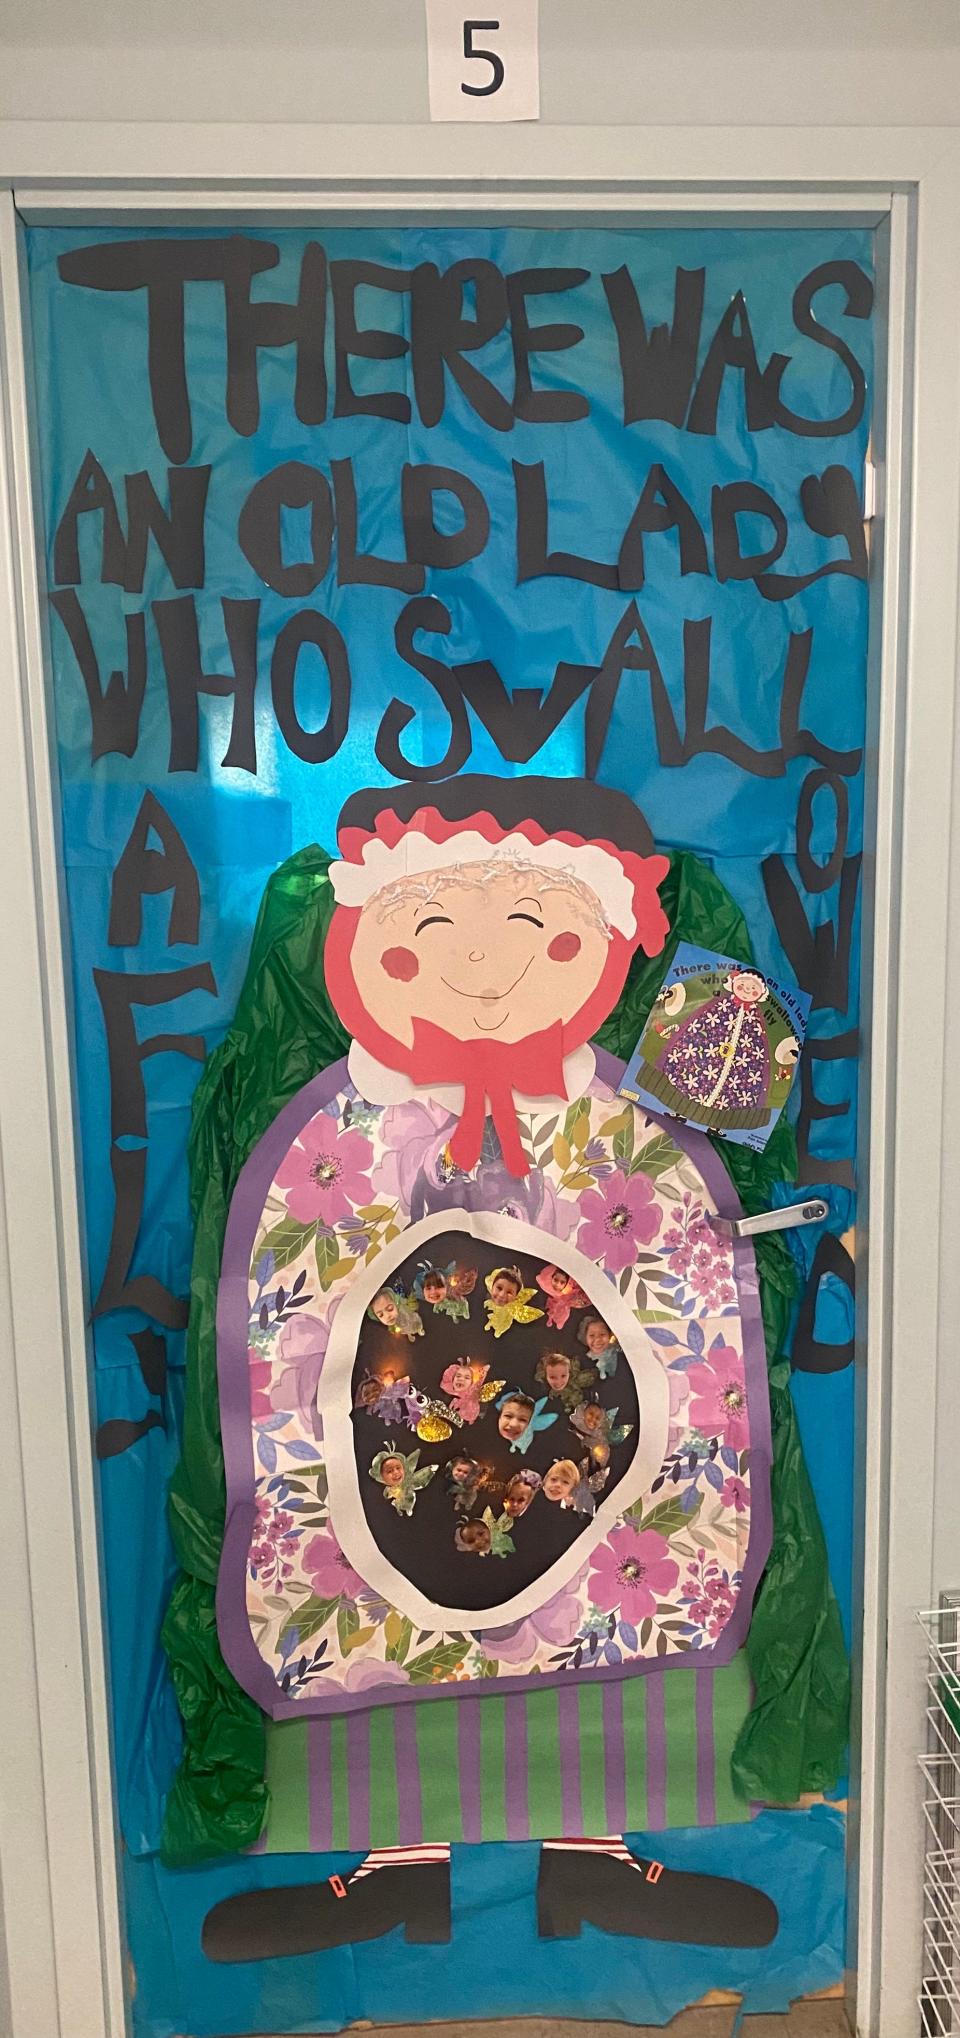 Other entries in the MOC Literacy Door Decorating contest included a door based on the book, "There Was an Old Lady Who Swallowed a Fly."